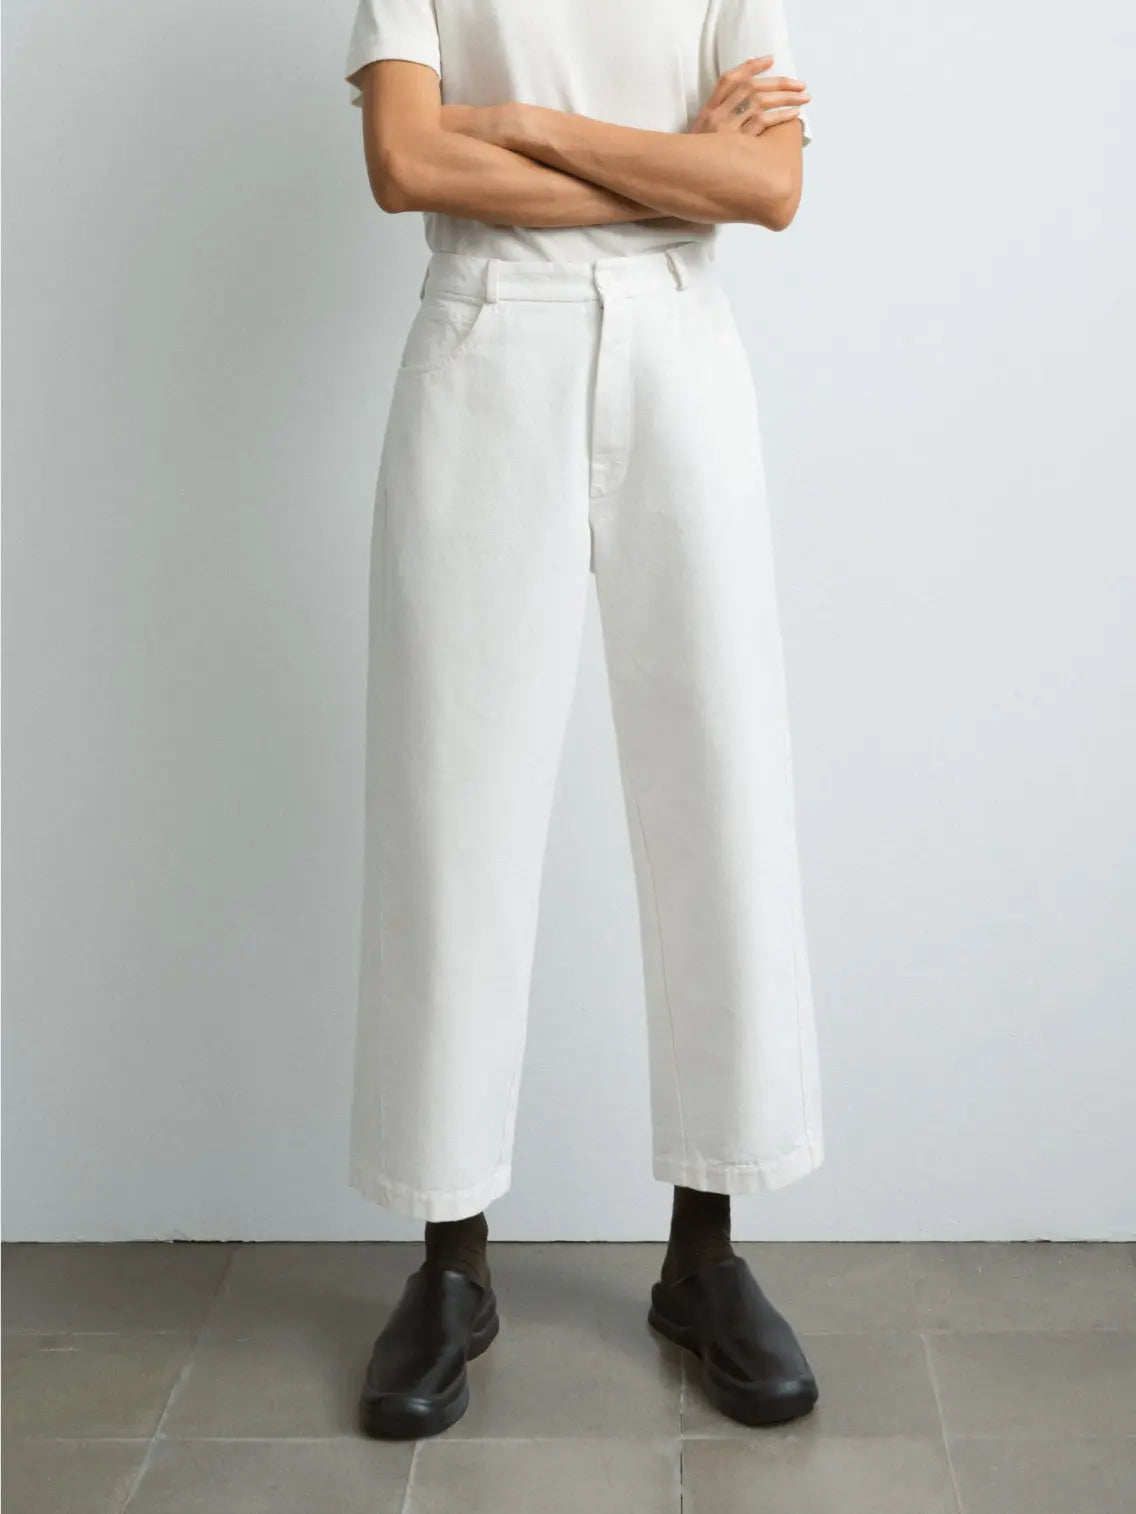 A pair of Straight Denim Pants Off-White from Cordera is displayed against a plain white background. The pants feature a button closure and belt loops at the waist, along with front pockets. The fabric appears smooth and slightly structured, embodying the chic style of Barcelona fashion.